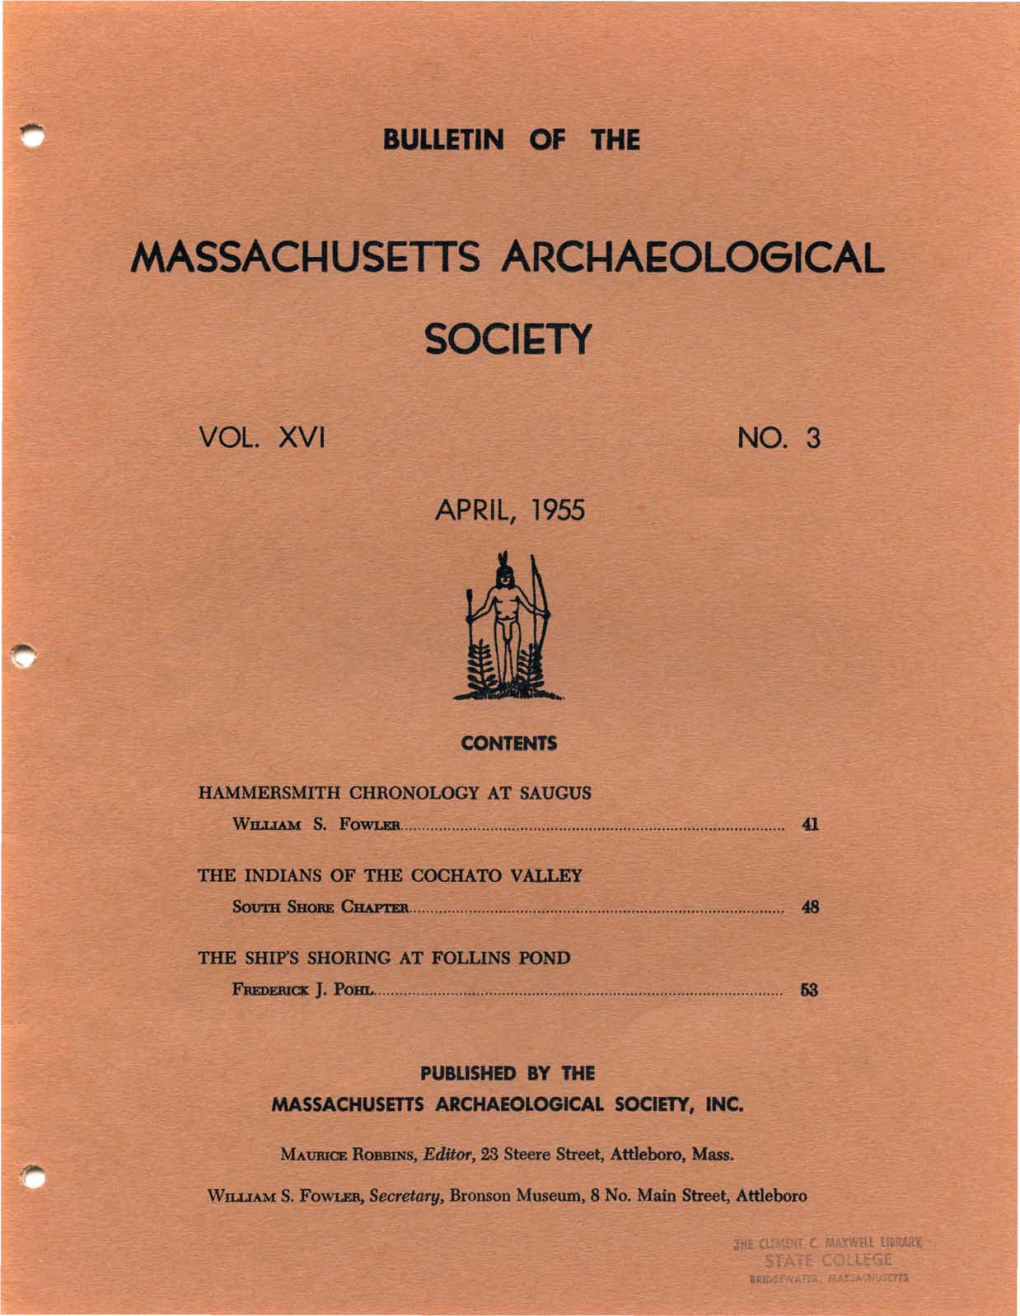 Bulletin of the Massachusetts Archaeological Society, Vol. 16, No. 3. April 1955